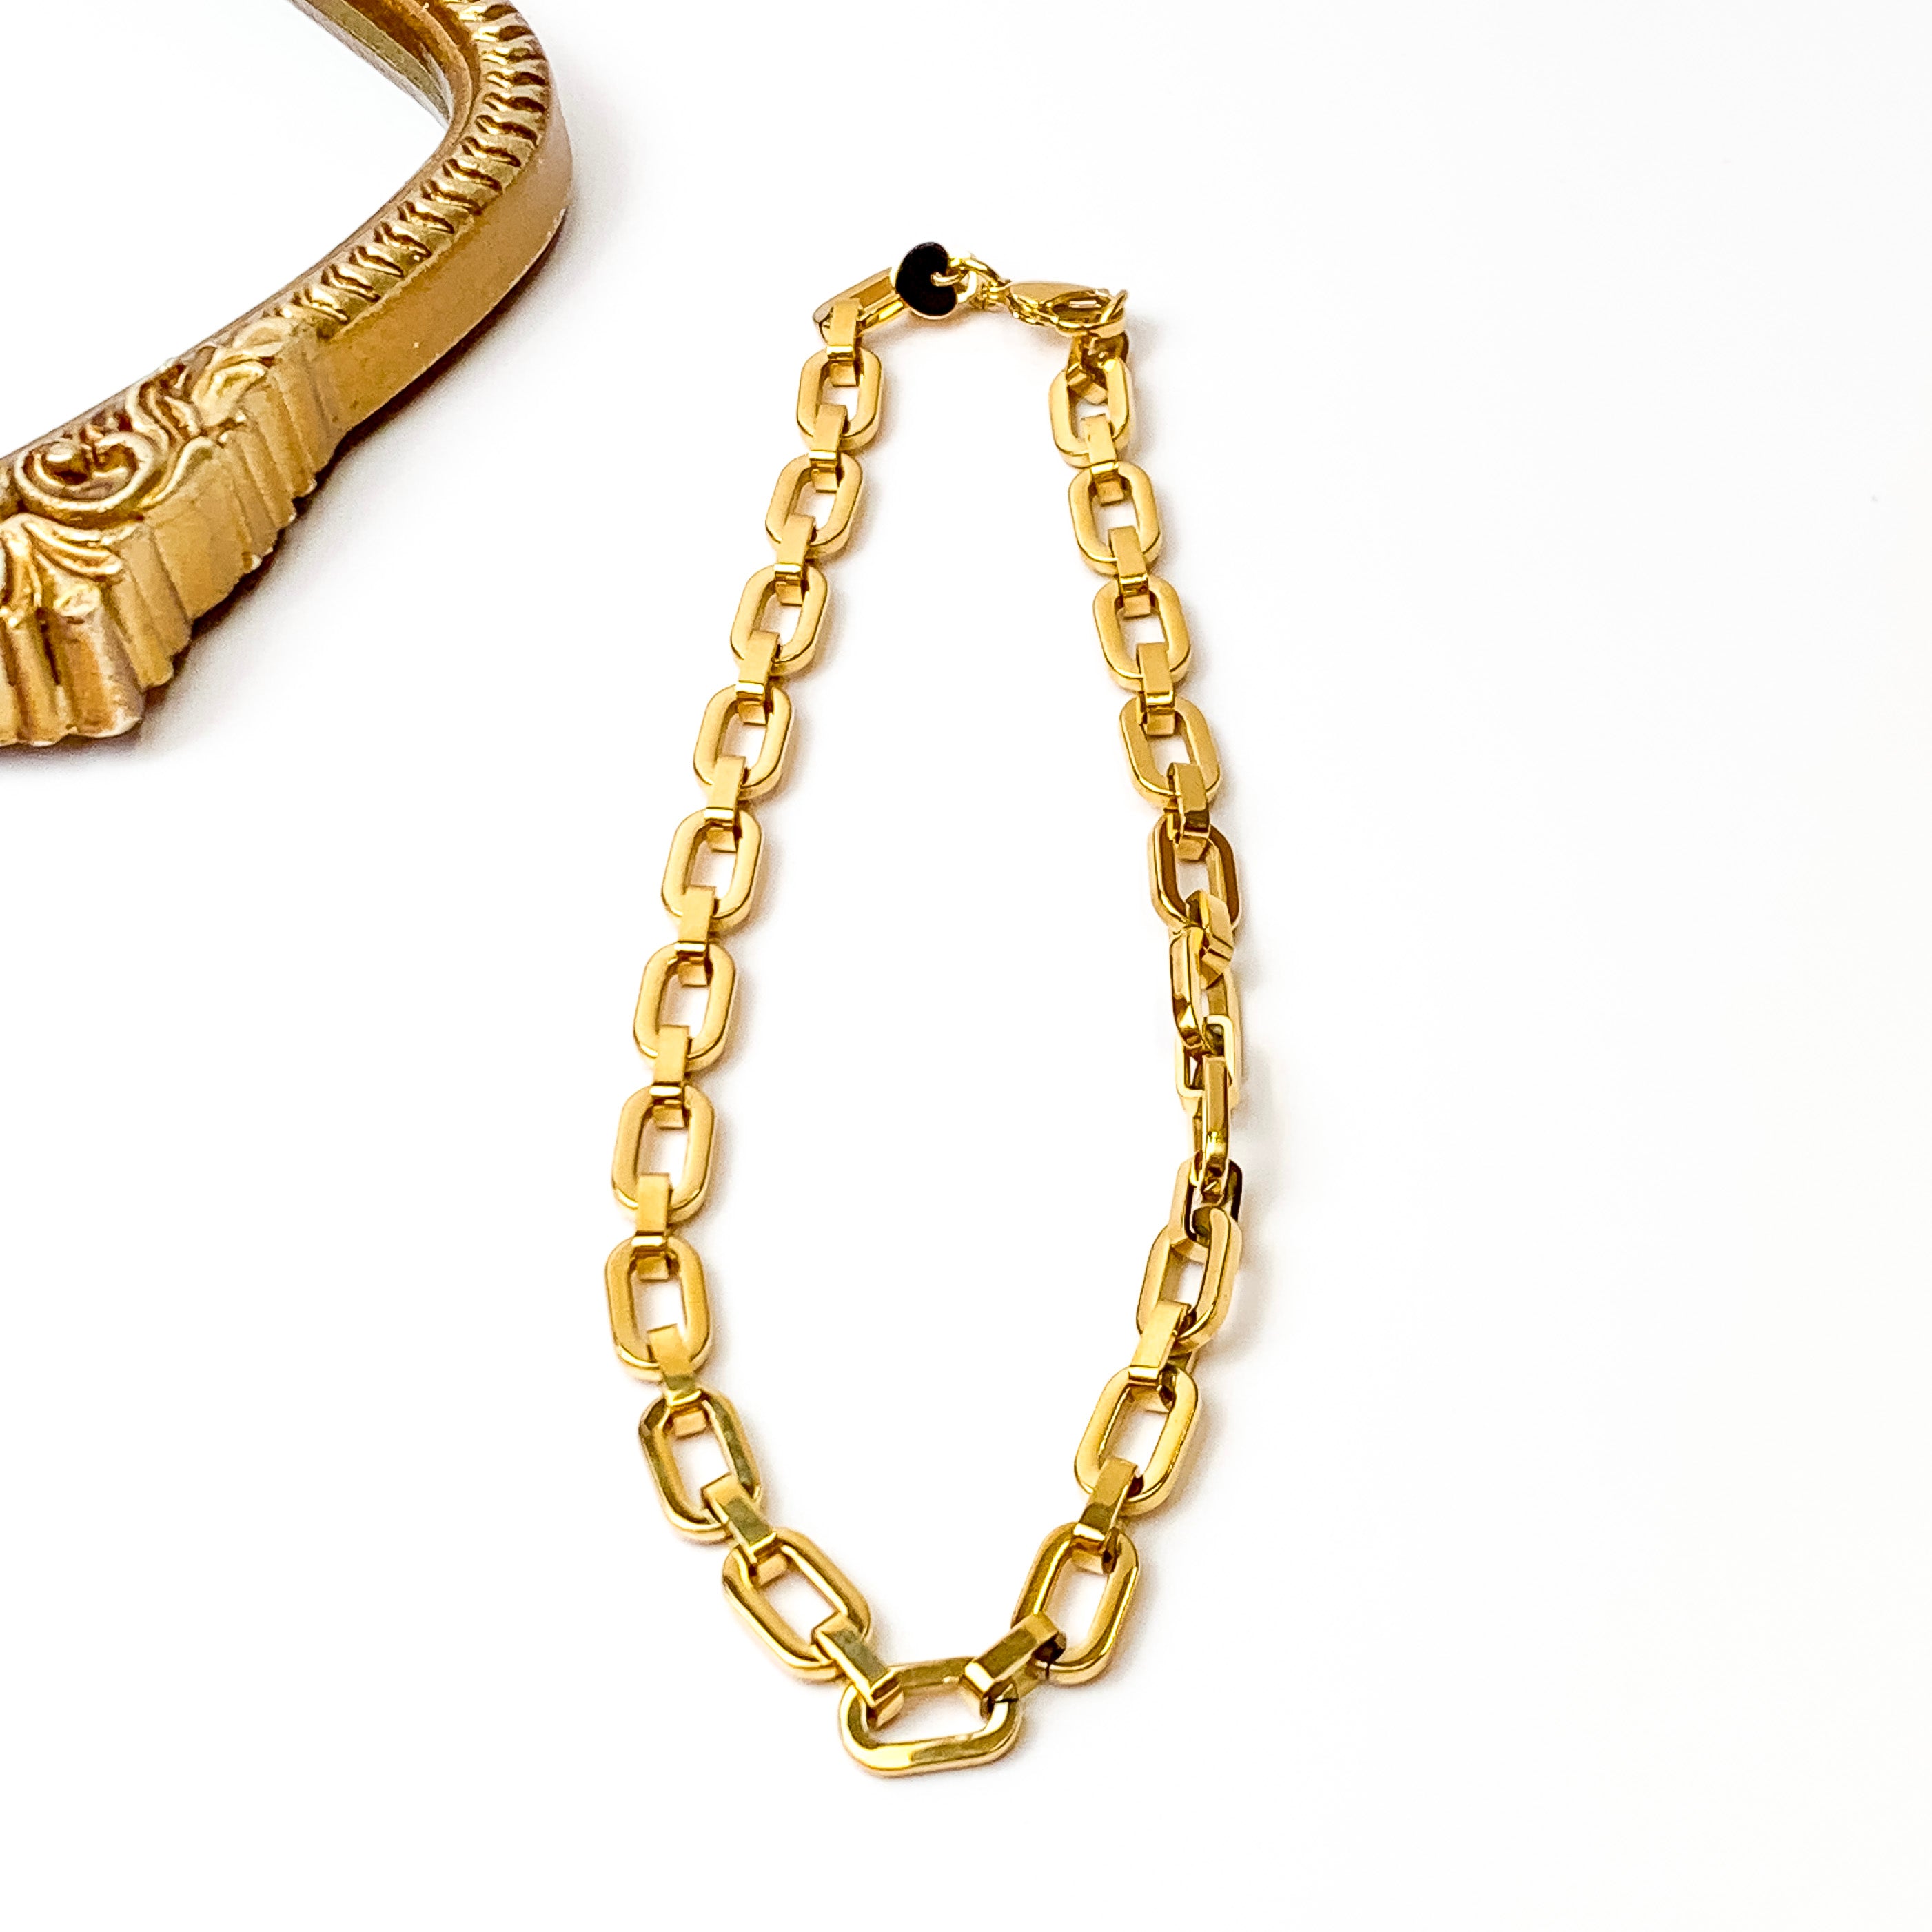 Bracha | Frances Chain Necklace in Gold Tone - Giddy Up Glamour Boutique